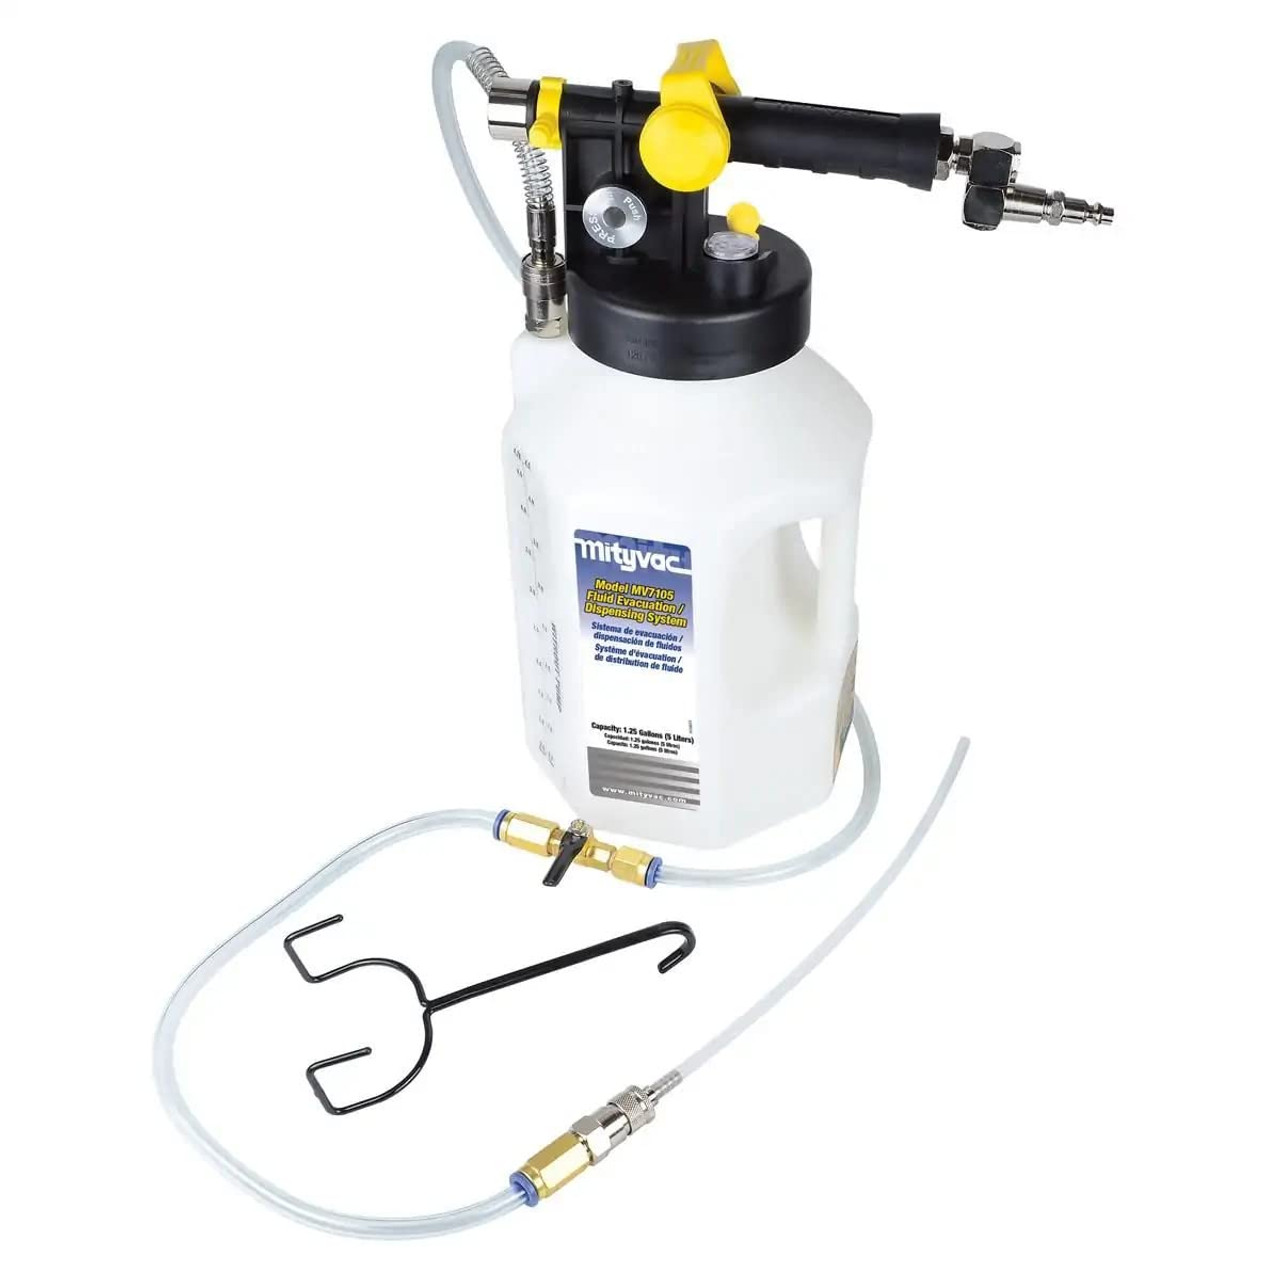  Mityvac MV7105 Fluid Extractor Dispenser for Evacuating,  Topping-Off, Refilling Reservoirs or Bleeding Hydraulic Brake/Clutch  Systems, 1.2 Gallon, 120 PSI, Compressed Air, Vacuum or Positive Pressure :  Automotive